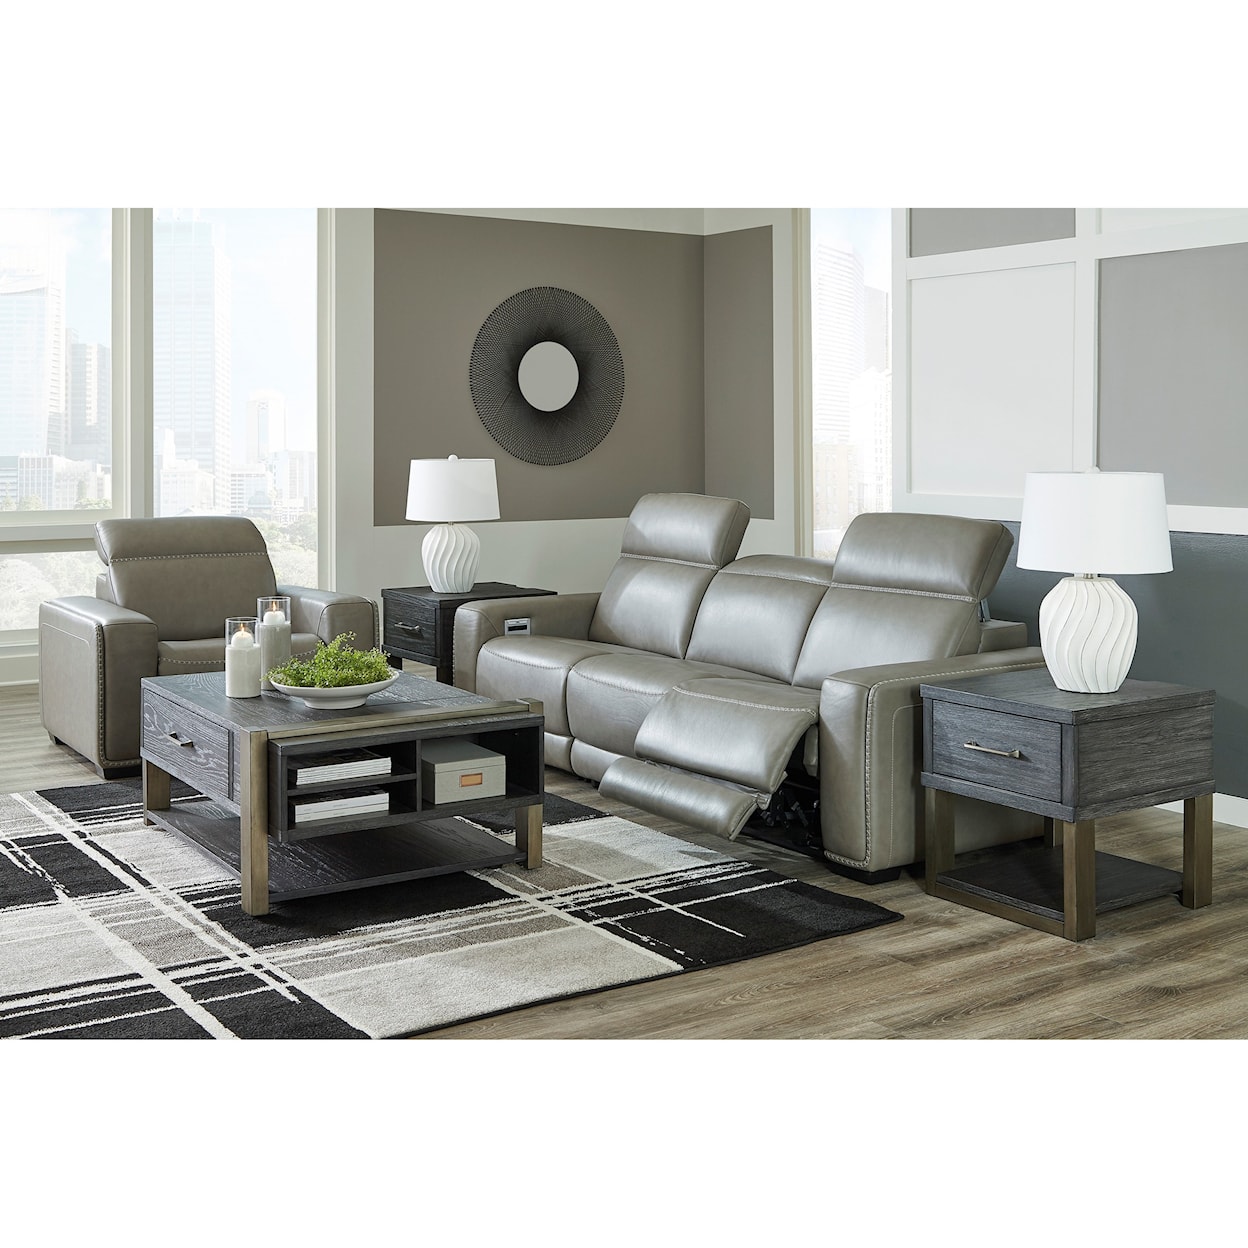 Signature Design by Ashley Correze Power Reclining Living Room Group